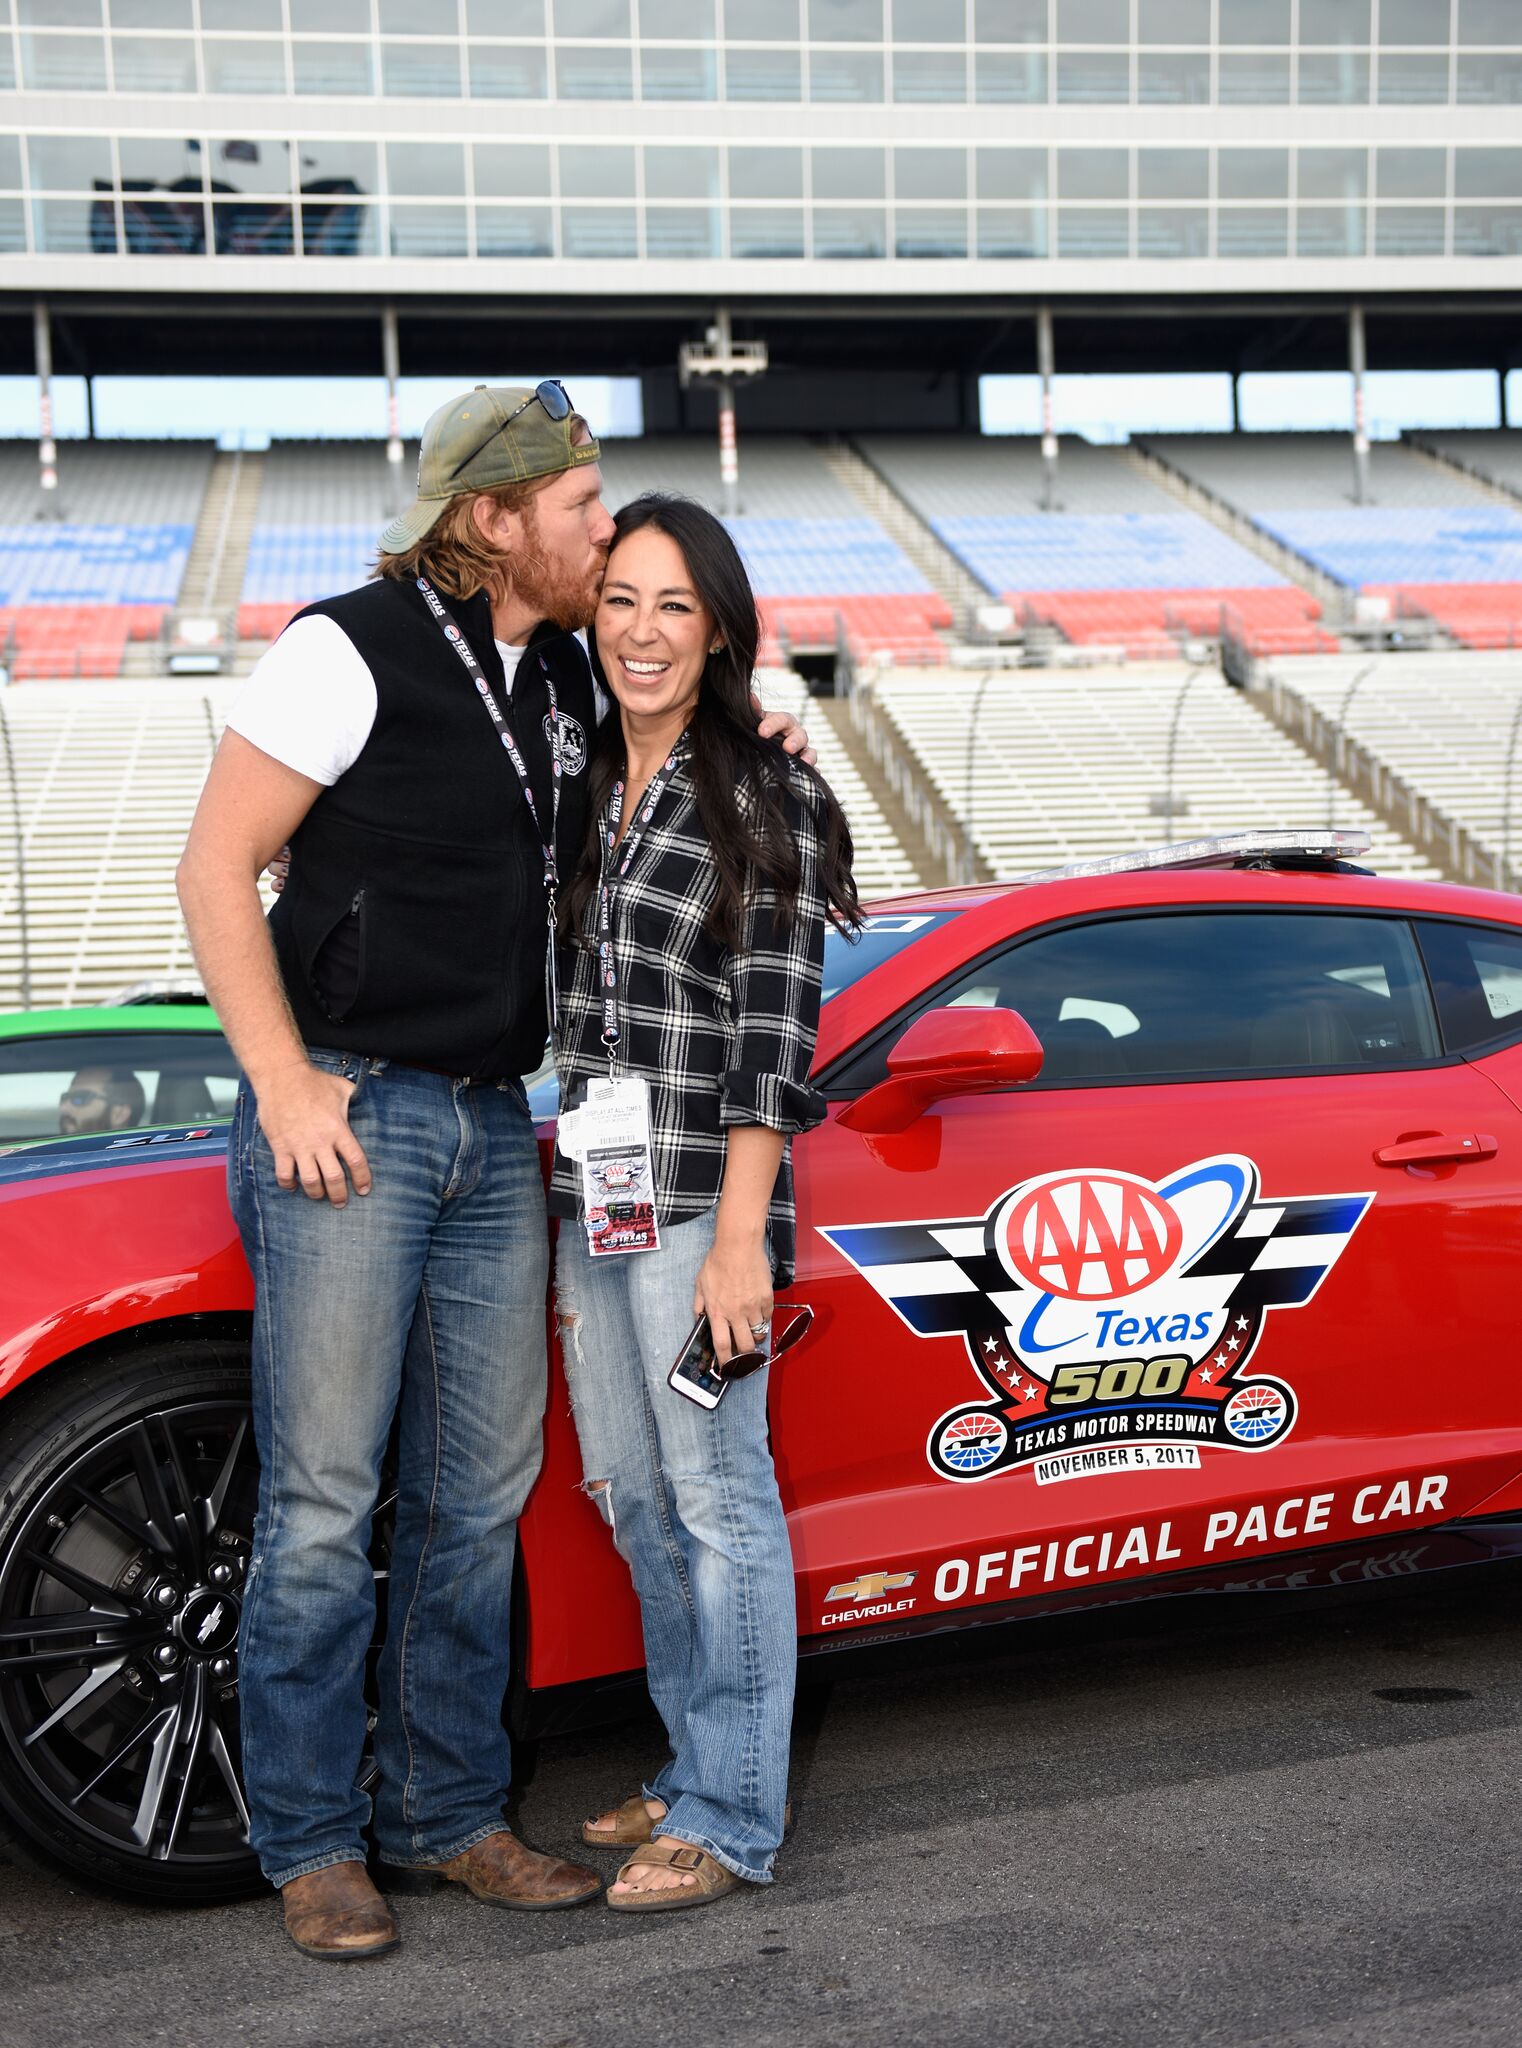 Chip and Joanna Gaines pose with the Monster Energy NASCAR Cup Series AAA Texas 500 pace car | Getty images / Global Images Ukraine